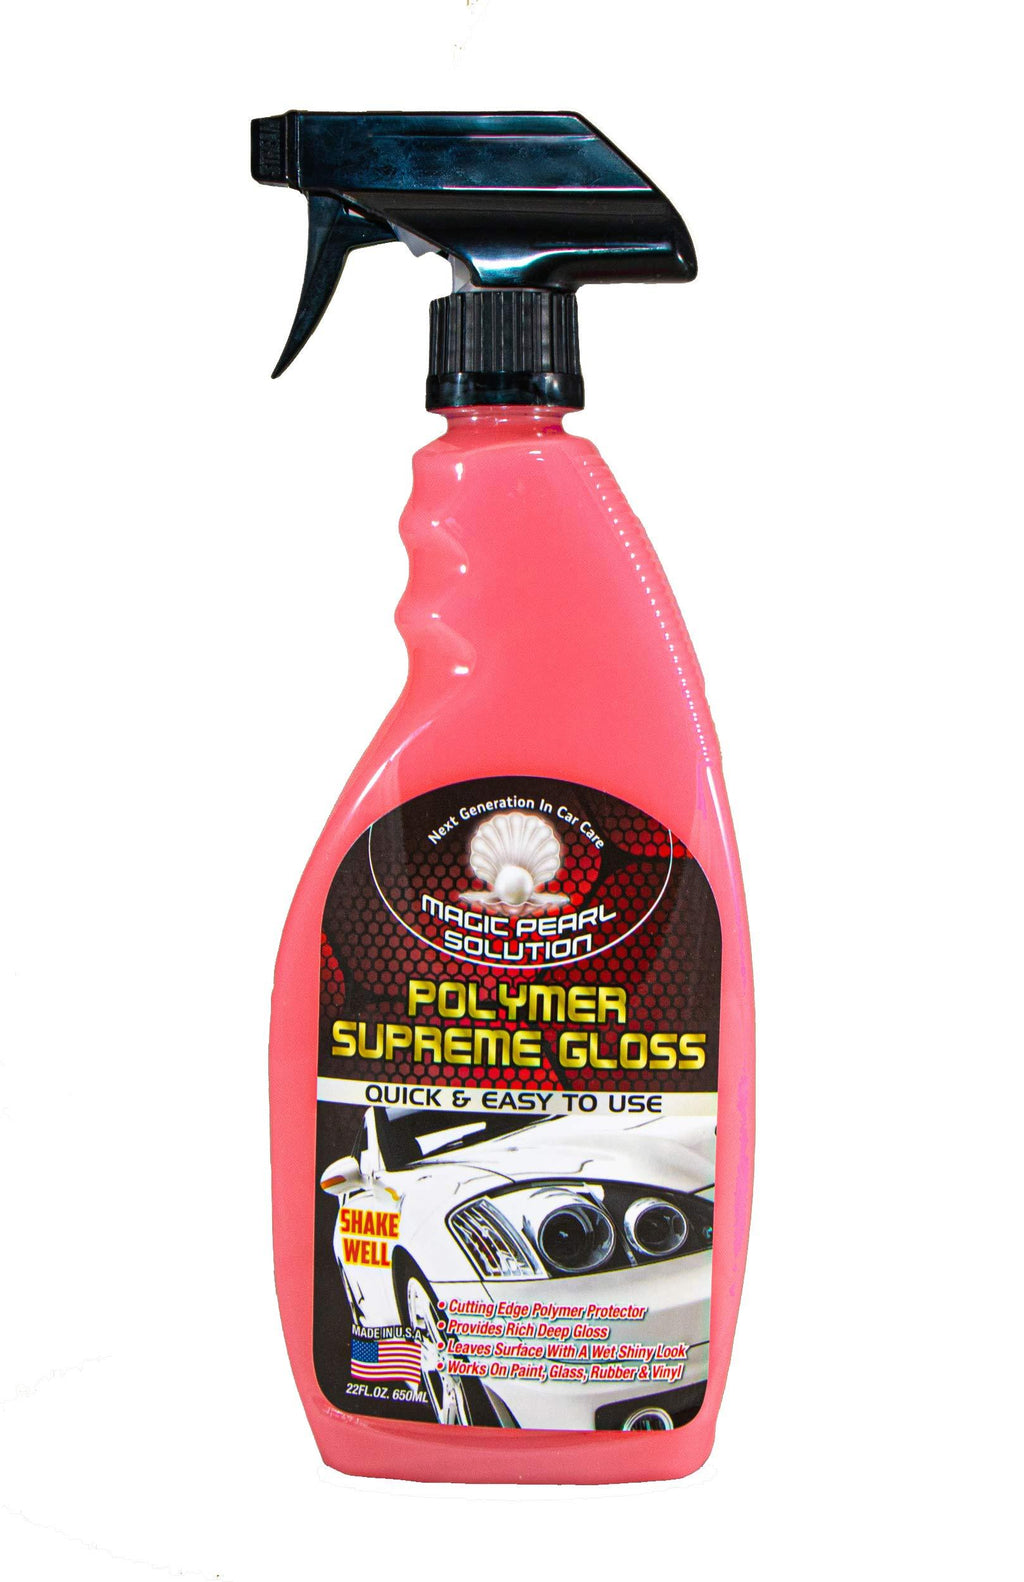 [Australia] - Magic Pearl Solution Supreme Polymer Gloss - 22 FL OZ - Exclusive Premium Formula - Protects and Provides a Long Lasting, Rich Gloss - Quick and Easy - Can Also be Used with Clay Bar - Made in USA 